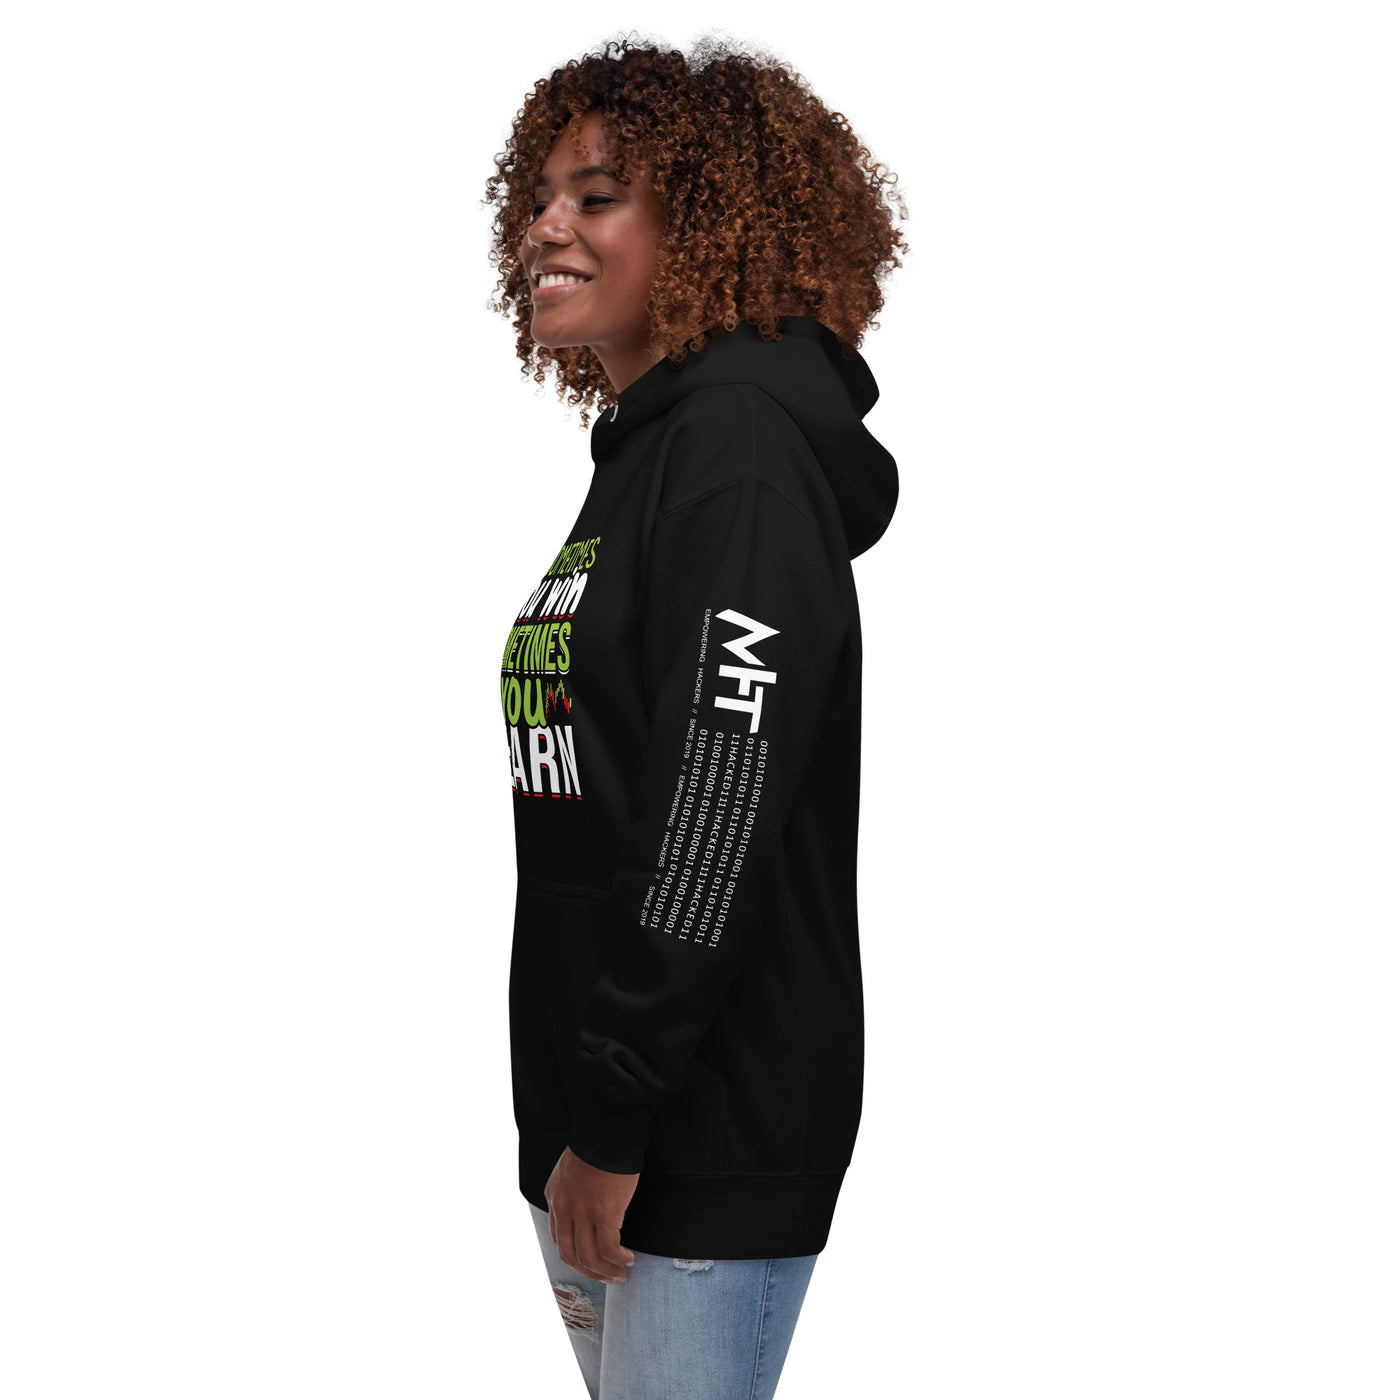 Sometimes you Win, sometimes you Learn - Unisex Hoodie